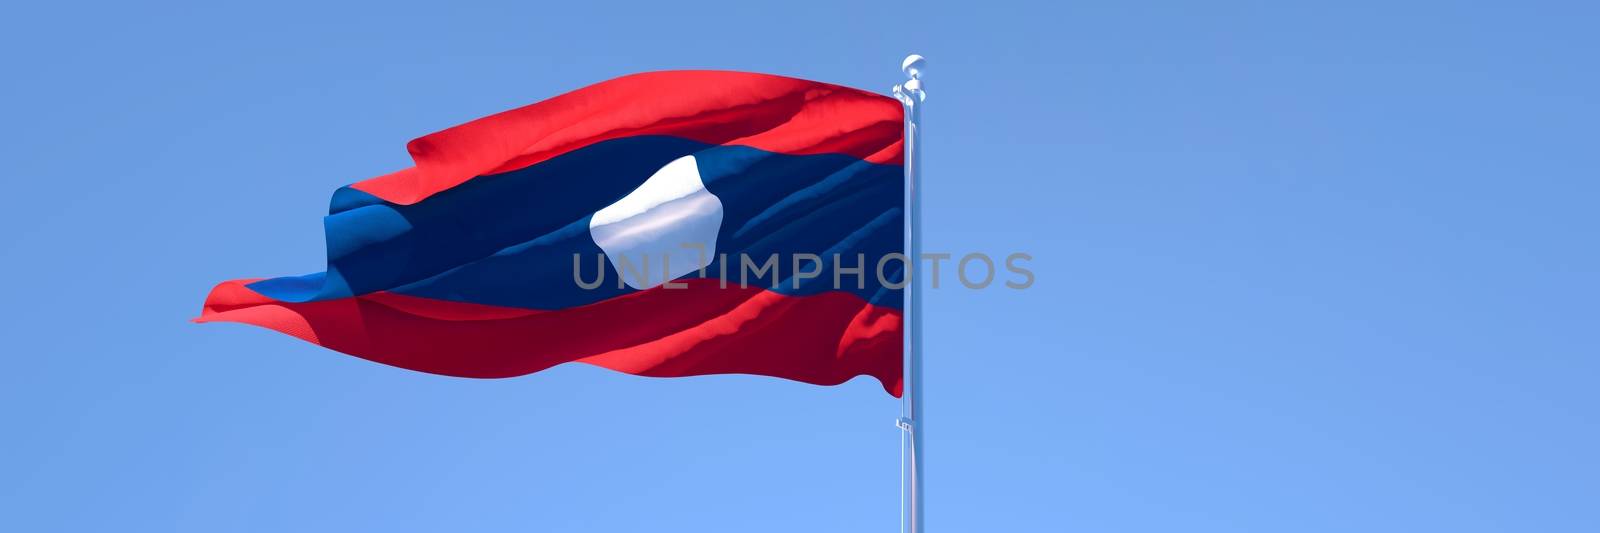 3D rendering of the national flag of Laos waving in the wind against a blue sky